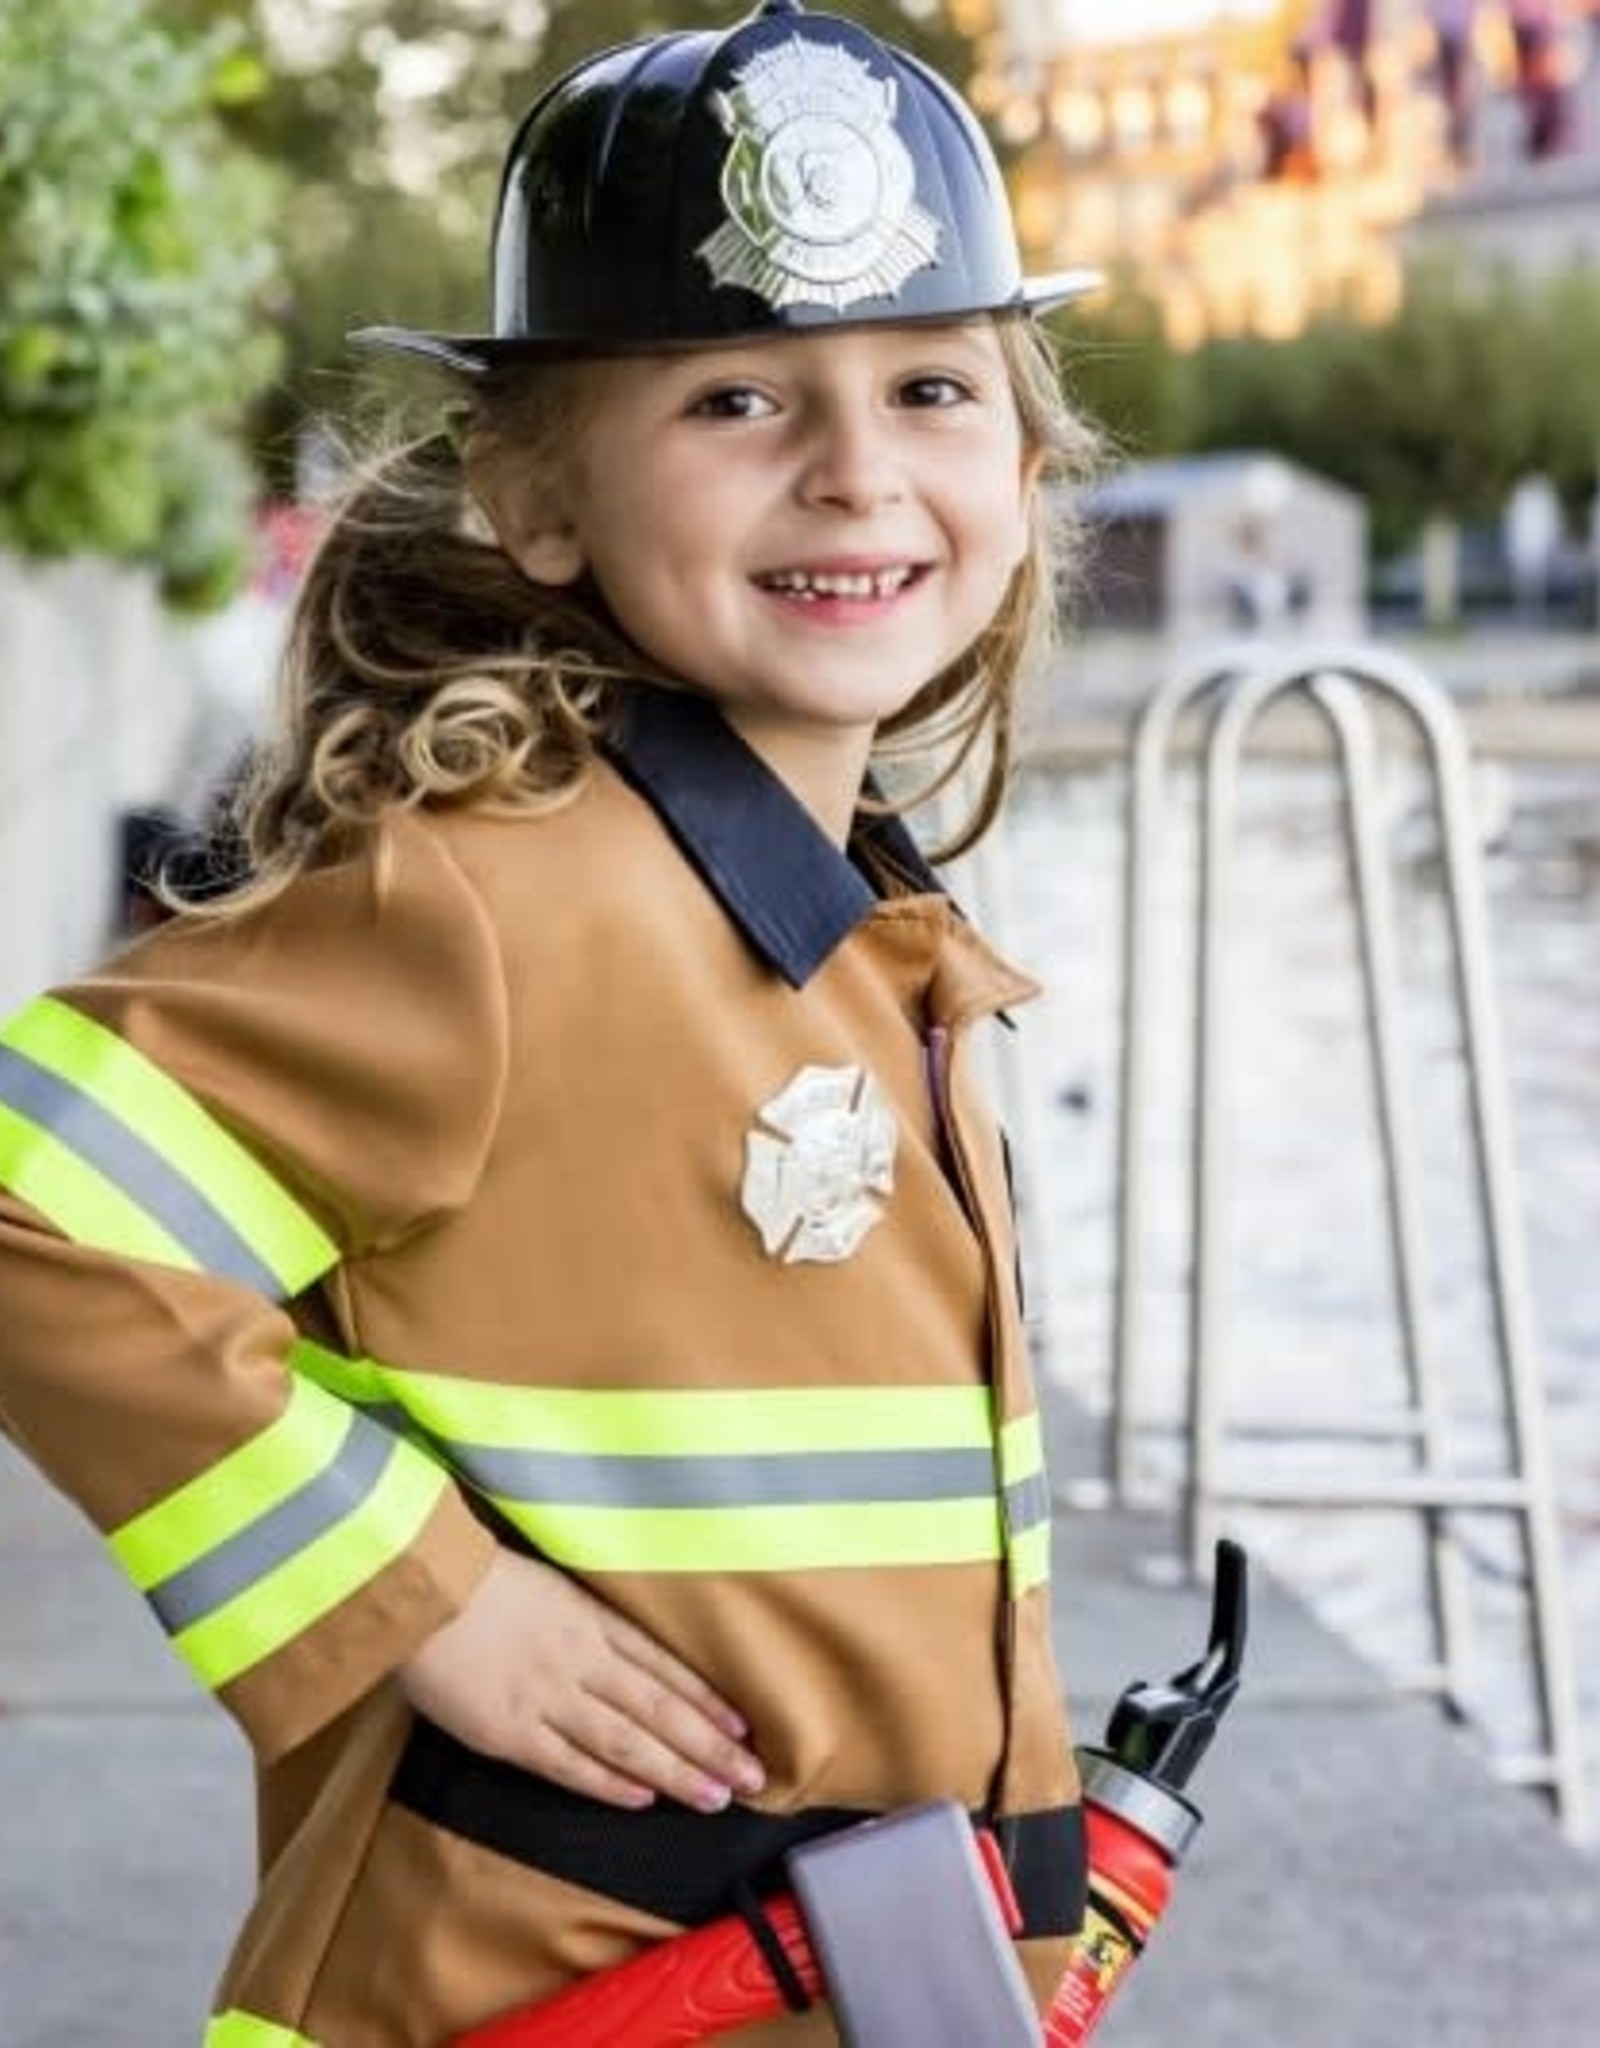 Great Pretenders Firefighter Set, Includes 5 Accessories, Tan, Size 5-6